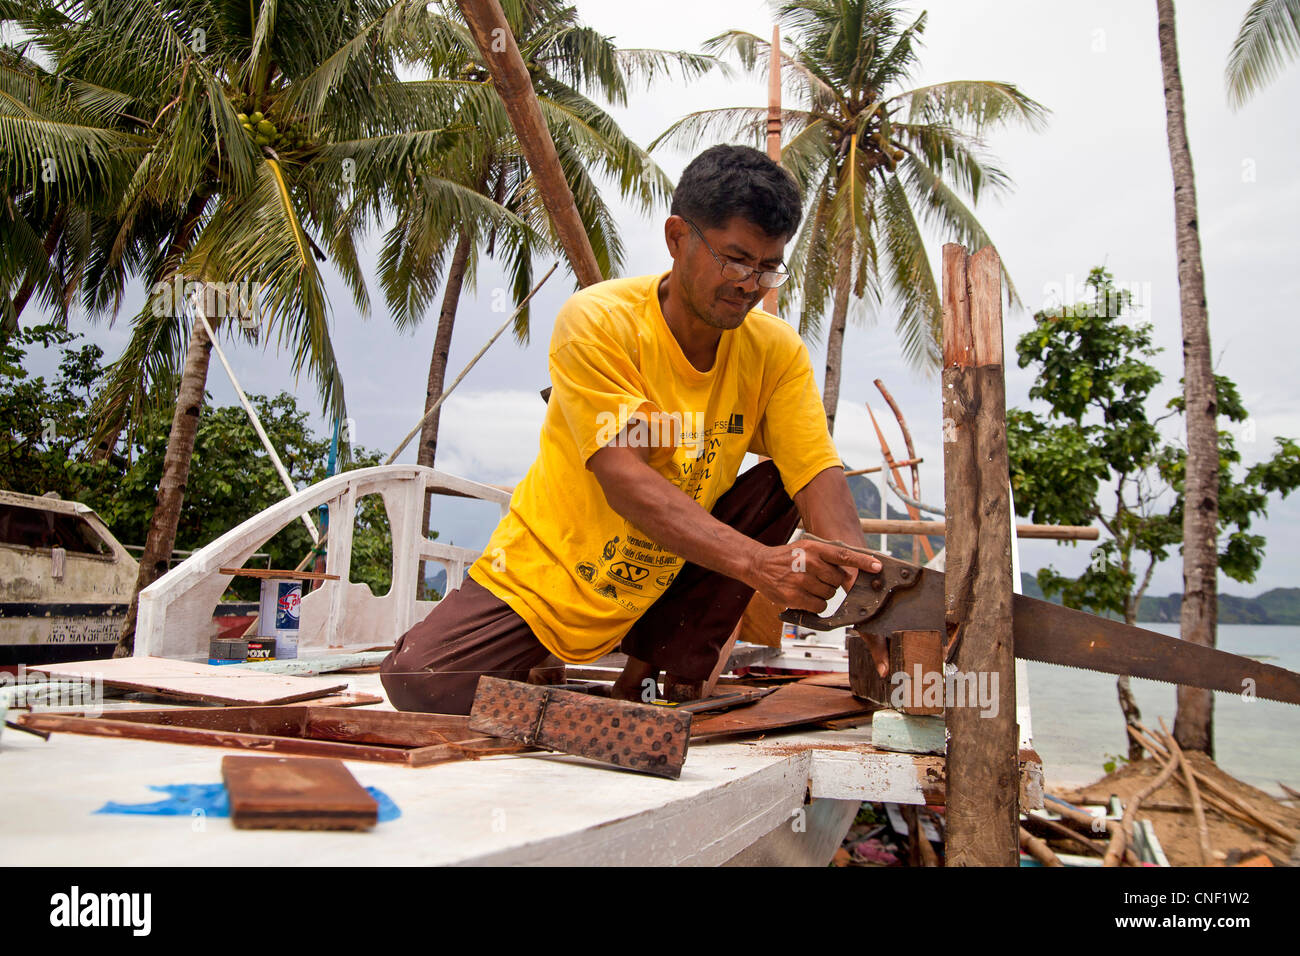 carpenter handcrafting a traditional outrigger boat, El Nido, Palawan, Philippines, Asia Stock Photo